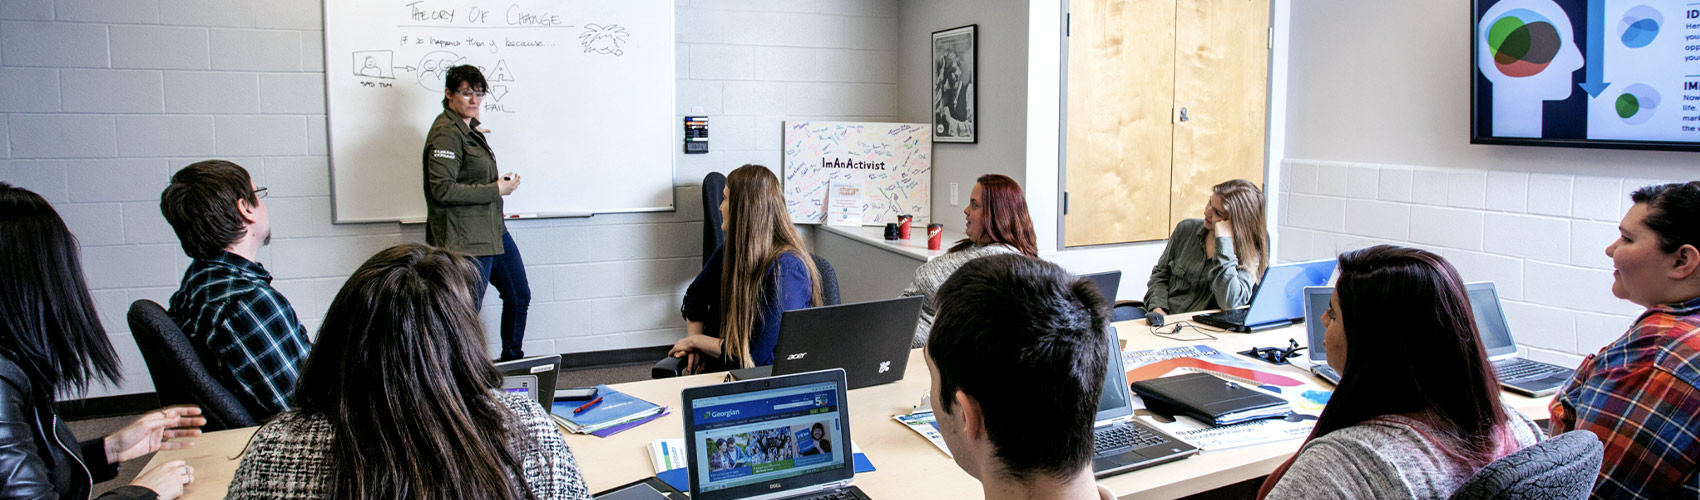 a group of students sitting at a table with laptops as a speaker makes notes on a whiteboard